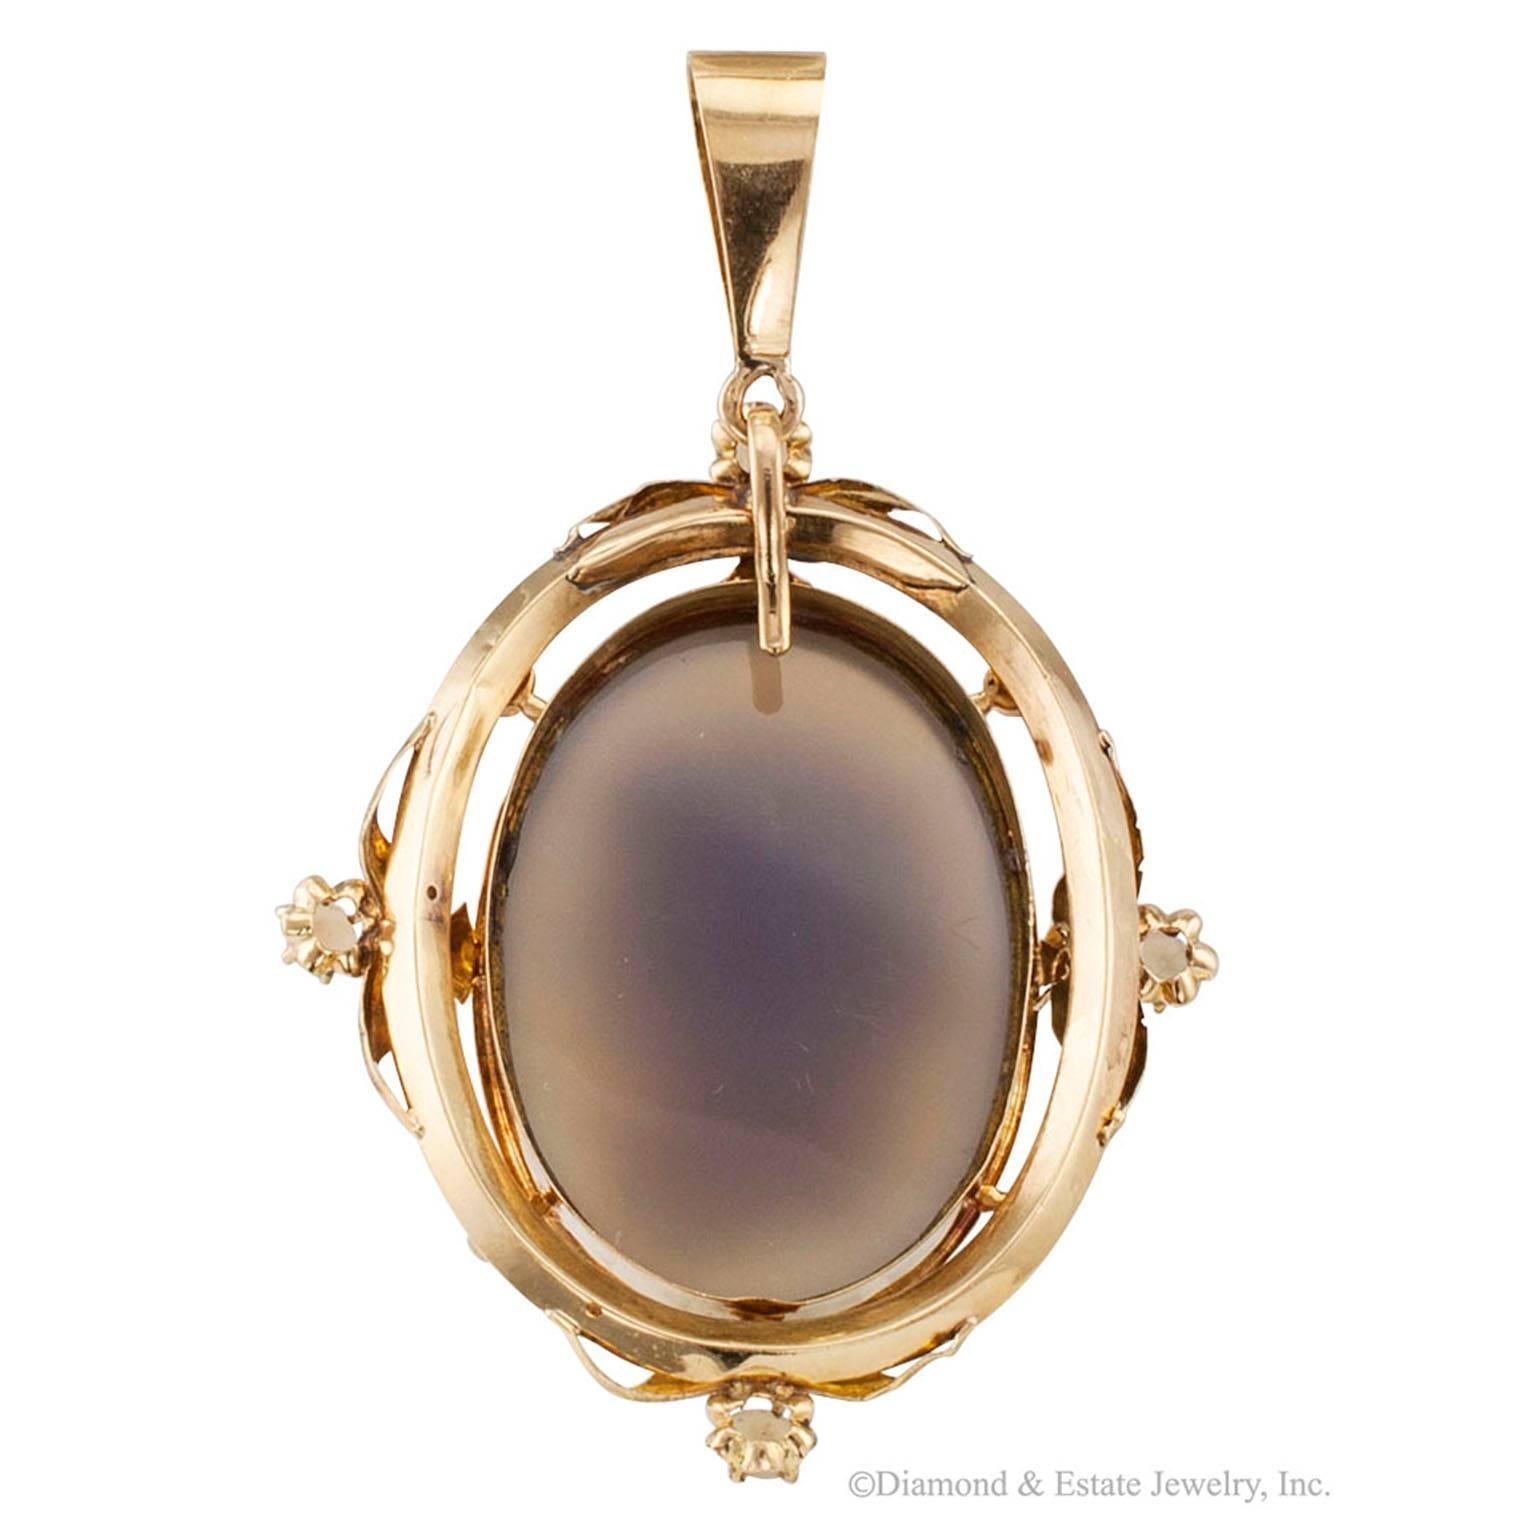 Victorian 1850s Hard Stone Cameo Pearl Gold Pendant

Victorian 1850s hard stone pearls and 18-karat gold cameo pendant.  Very pristine.  The crisp and highly detailed sardonyx carving depicts the profile of a woman's head facing right, with